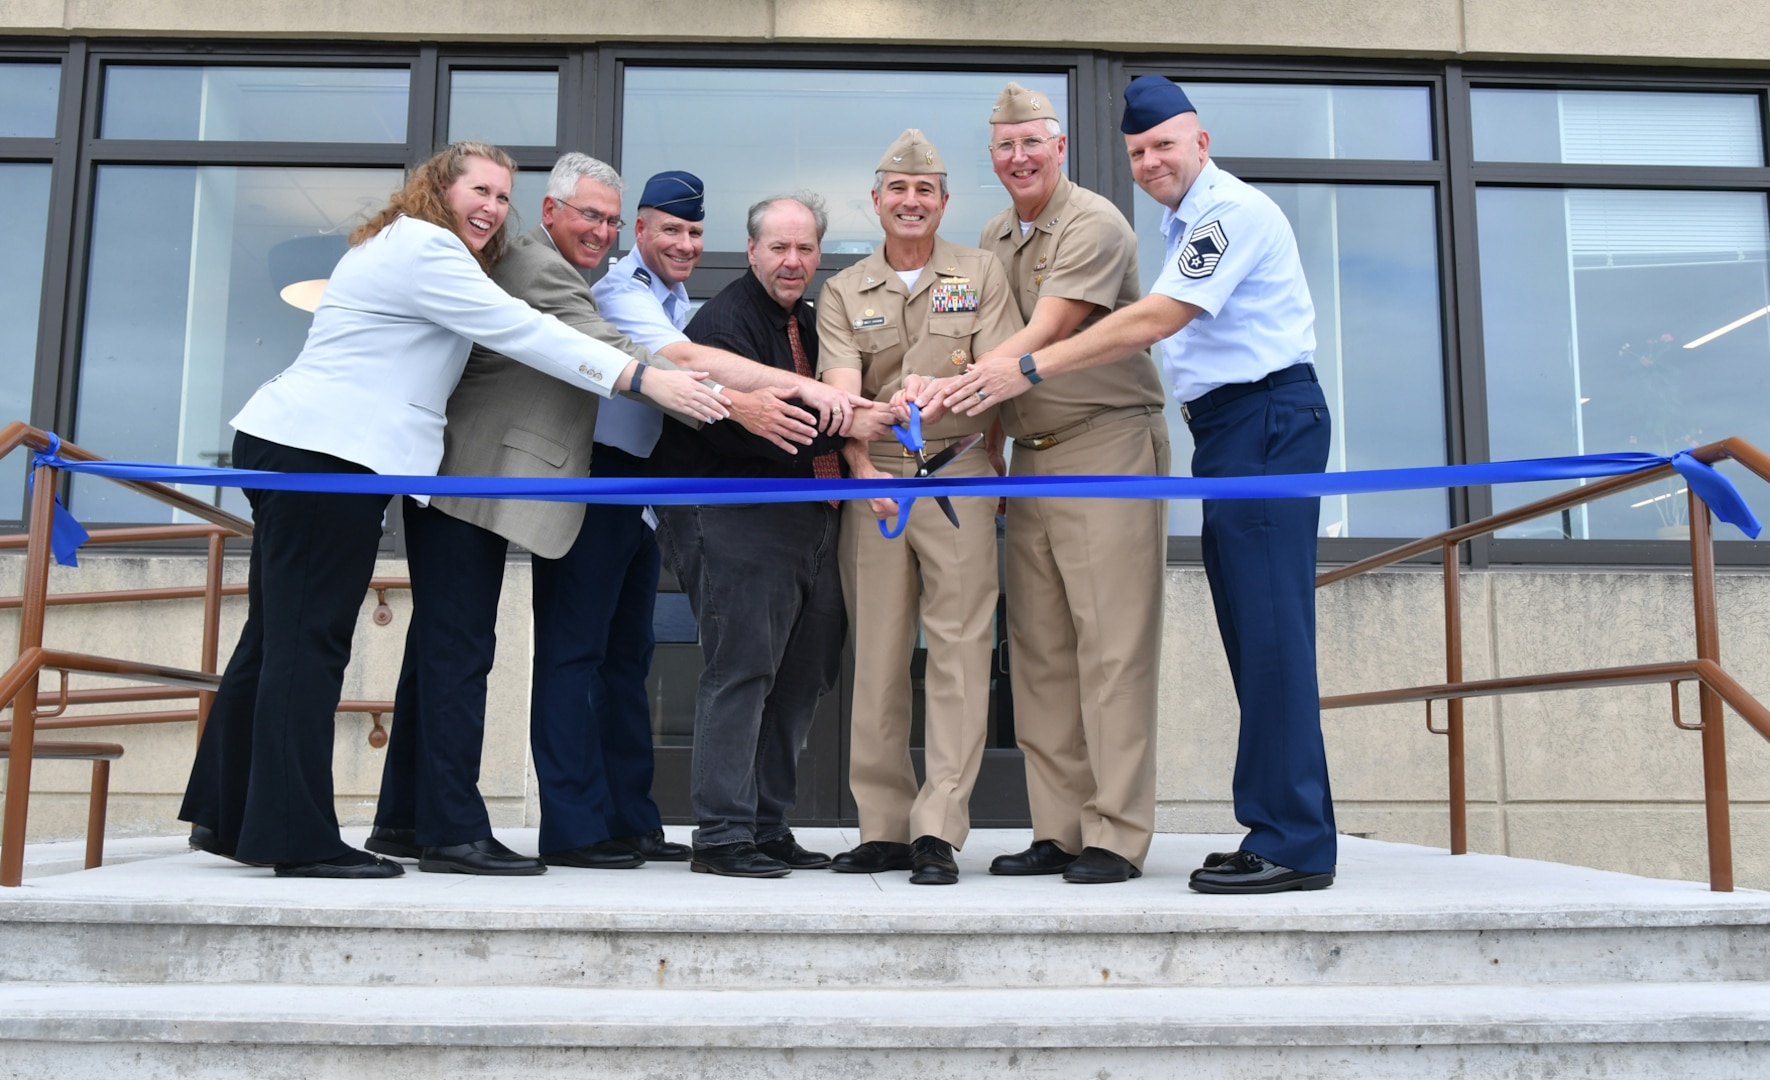 Group shot of military and civilian personnel cutting a blue ribbon in front of a building